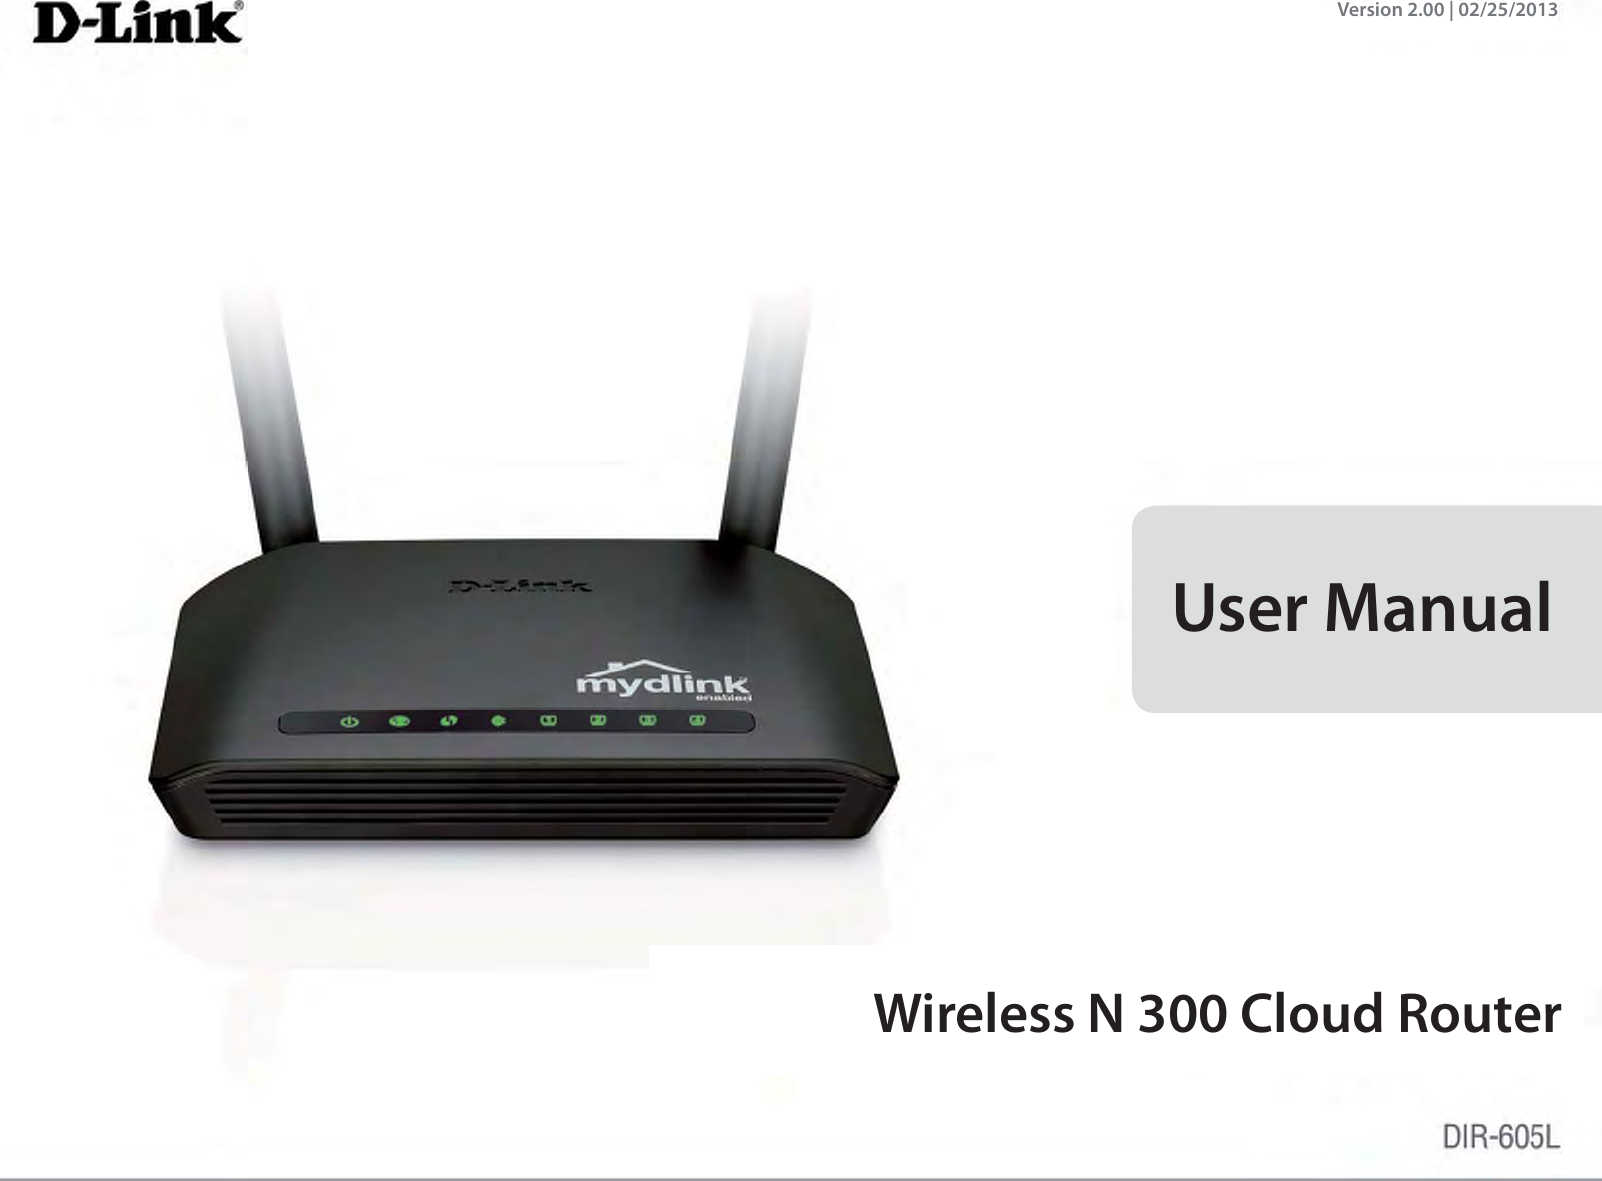 User ManualWireless N 300 Cloud Router Version 2.00 | 02/25/2013